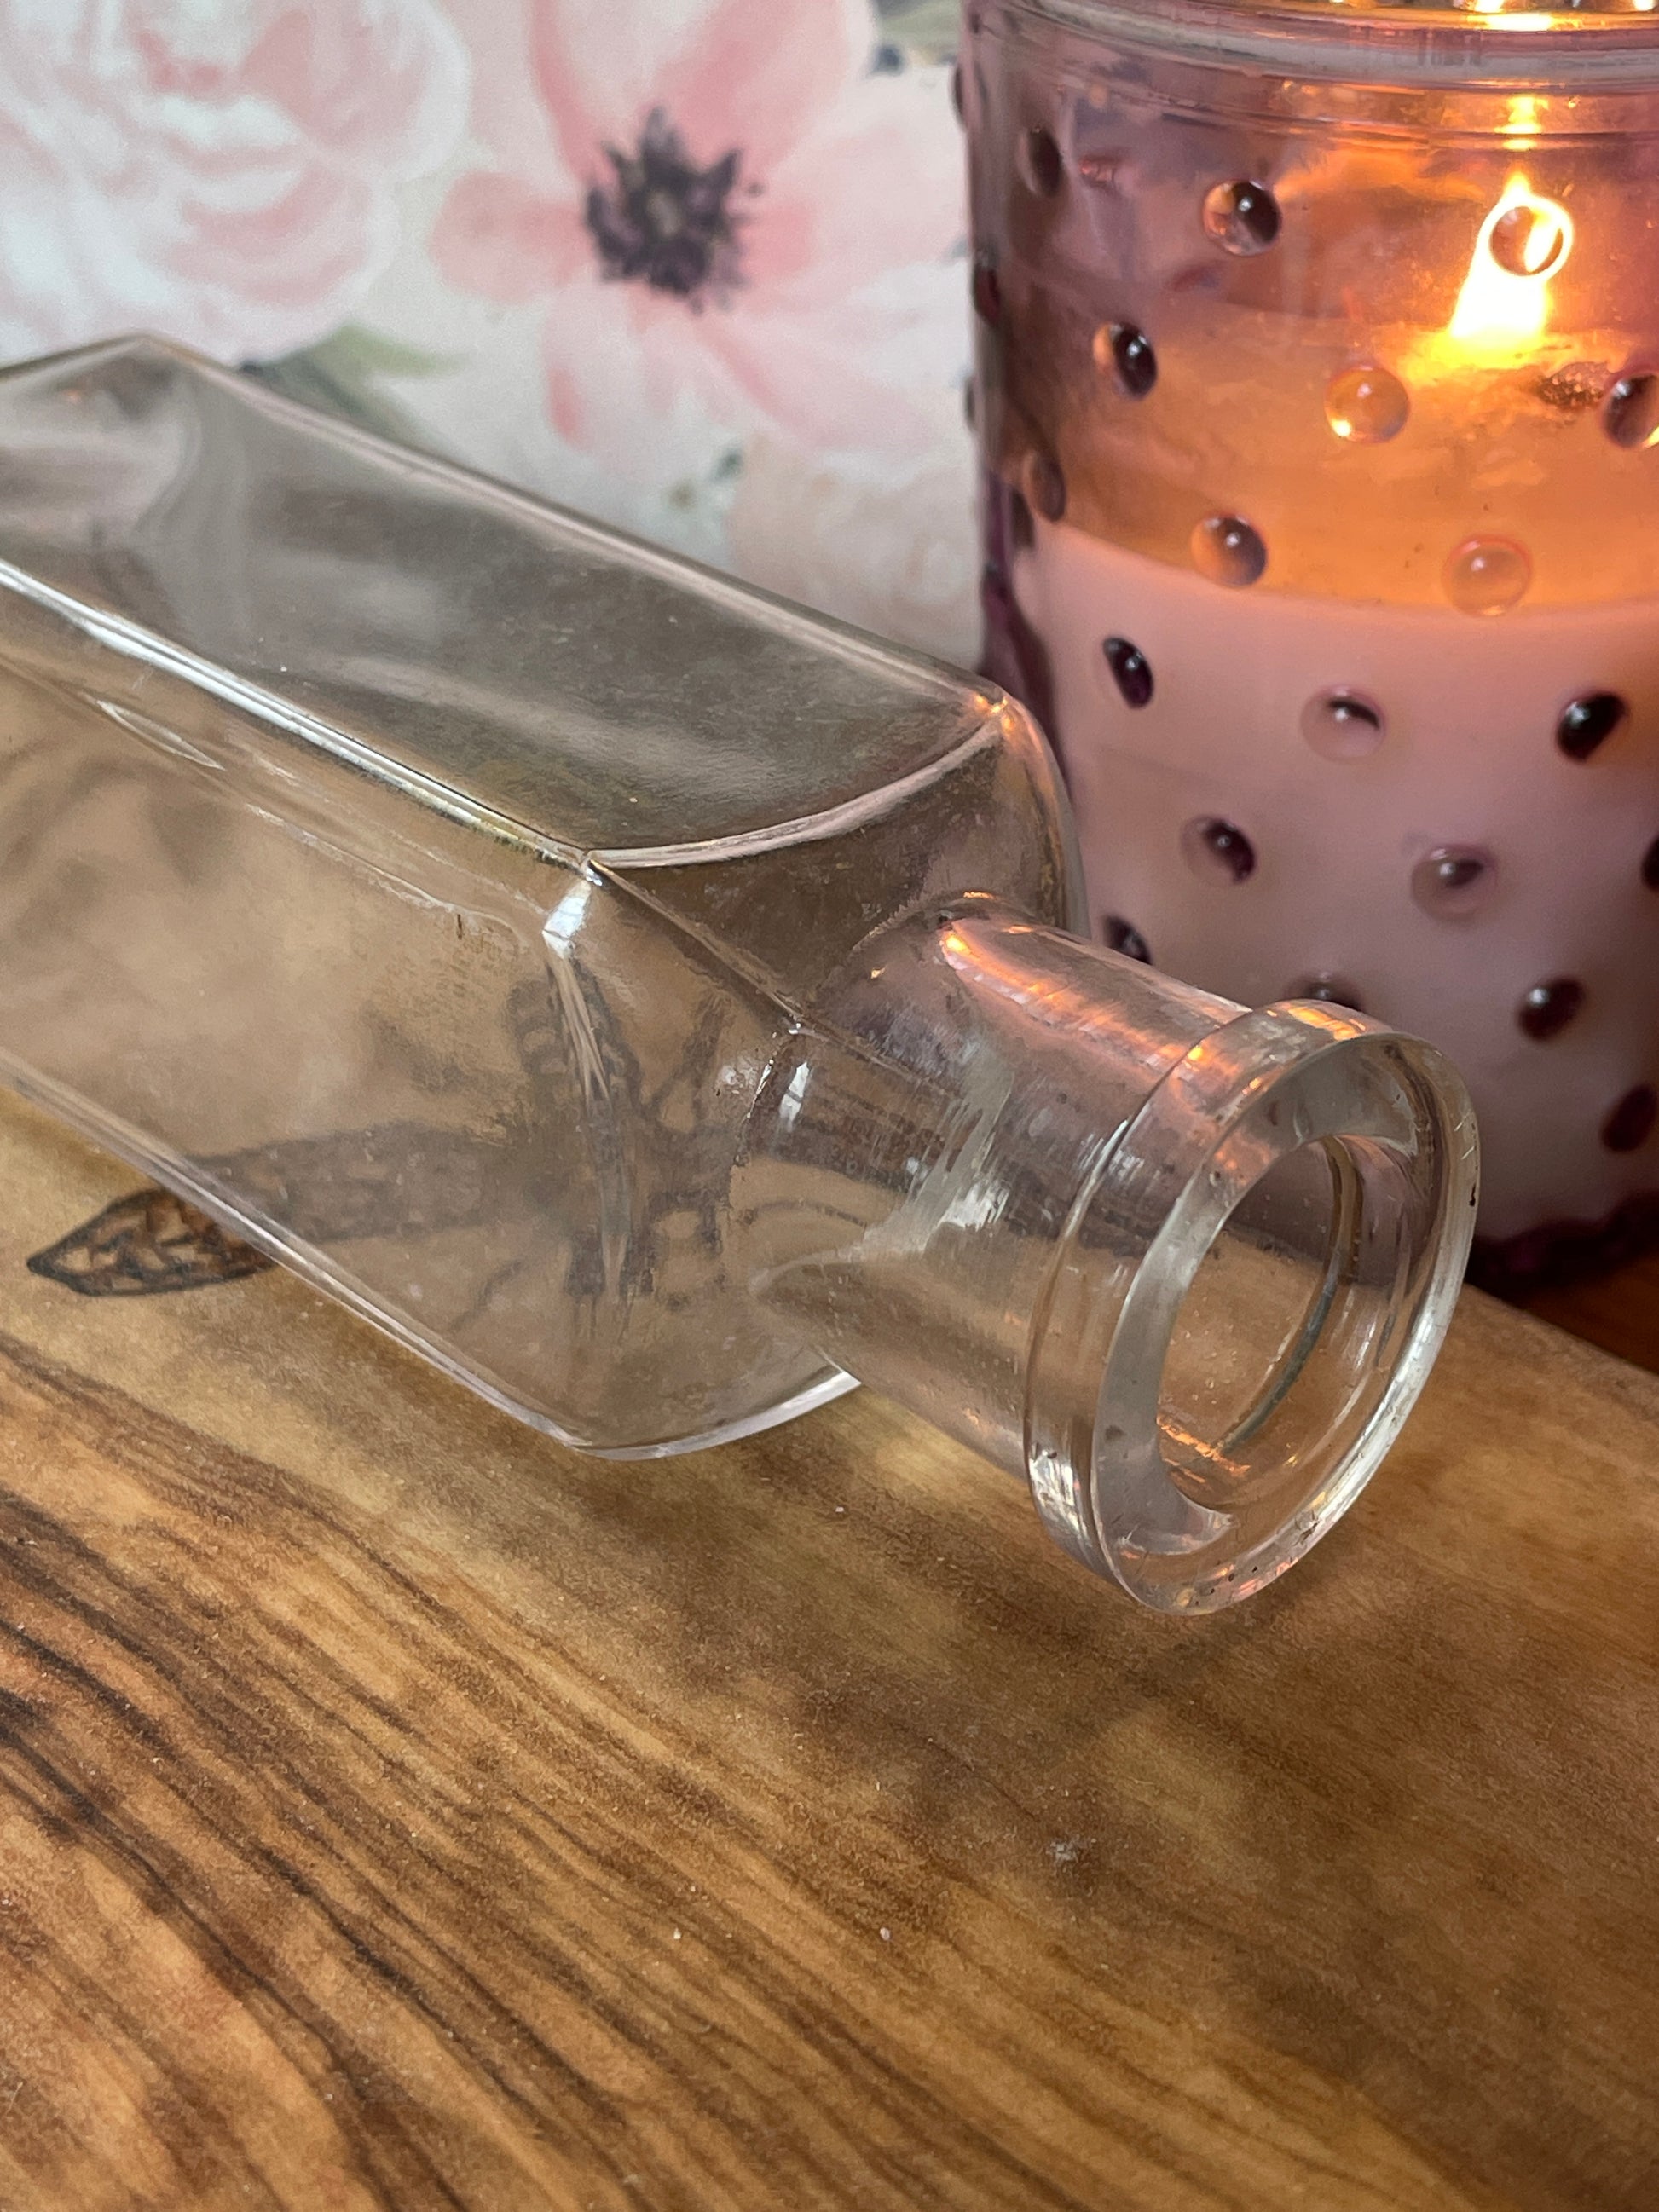 Antique Glass Apothecary Bottle